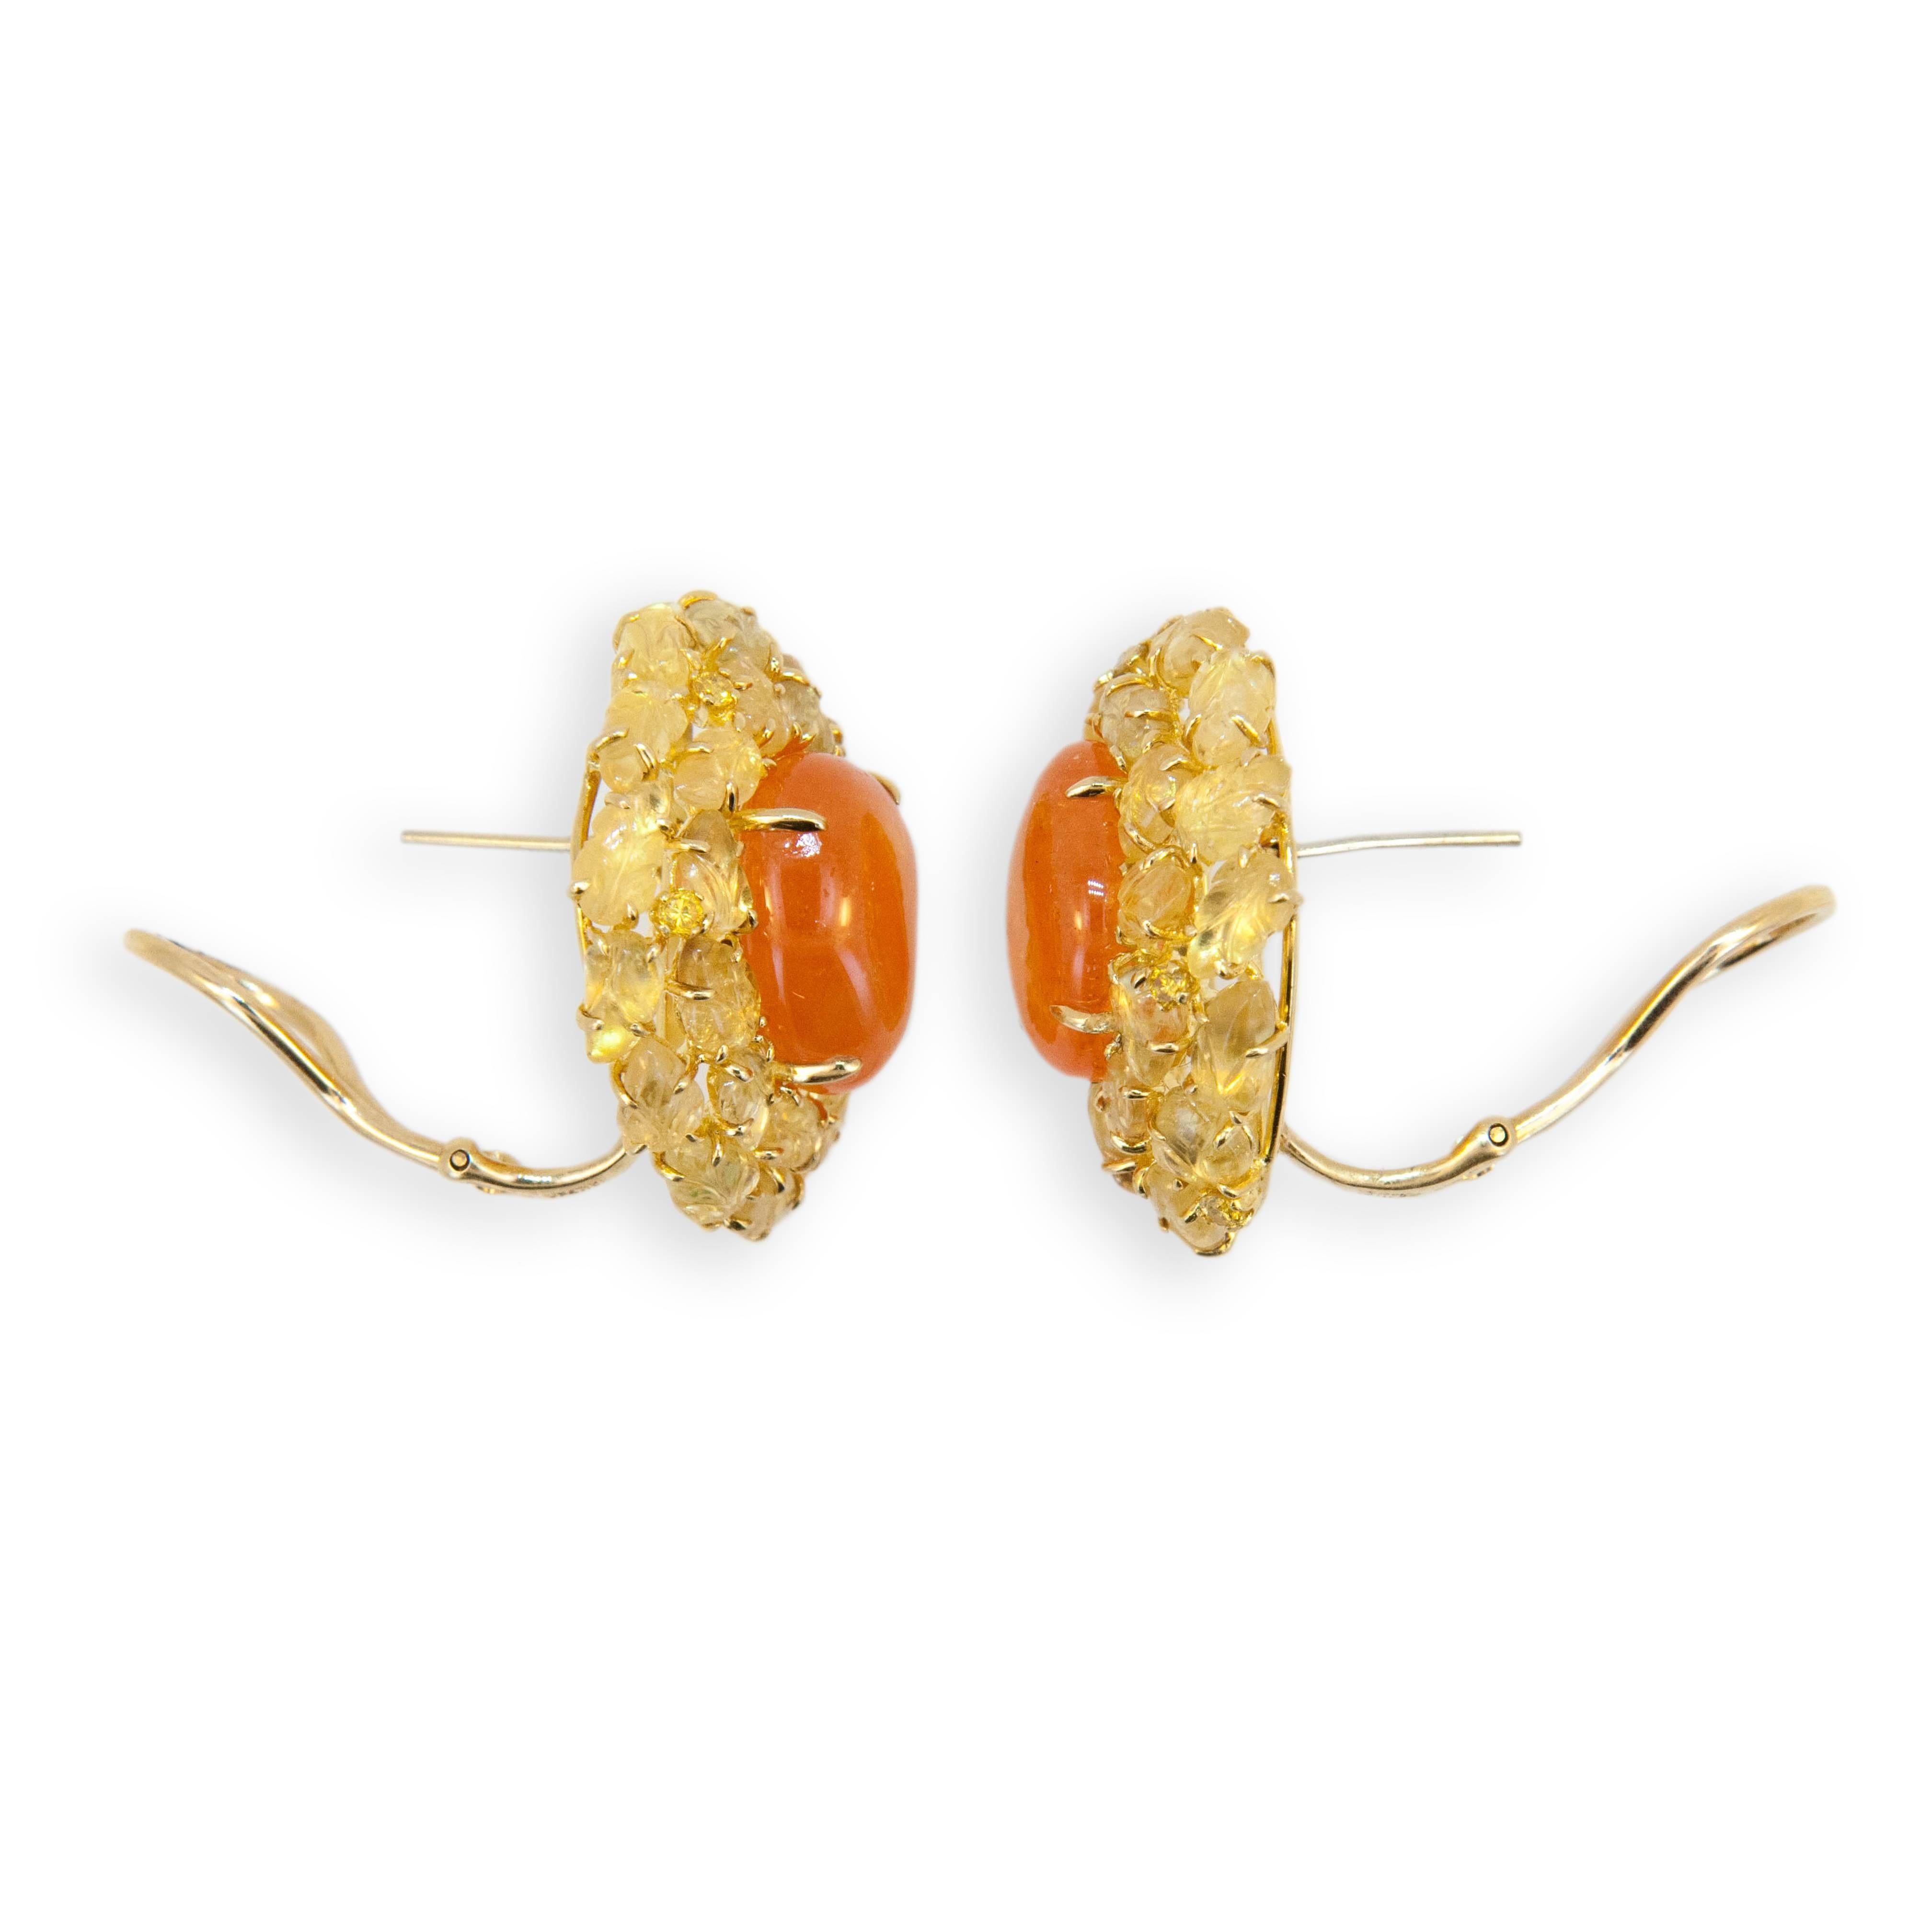 18 karat yellow gold earring (2) Mandarin Garnet 29.30 carats total weight. (47) carved yellow sapphire leaves 19.09 carats total weight and (9) yellow diamonds .30 carats total weight. Posts fold down so can be worn as clips or pierced.